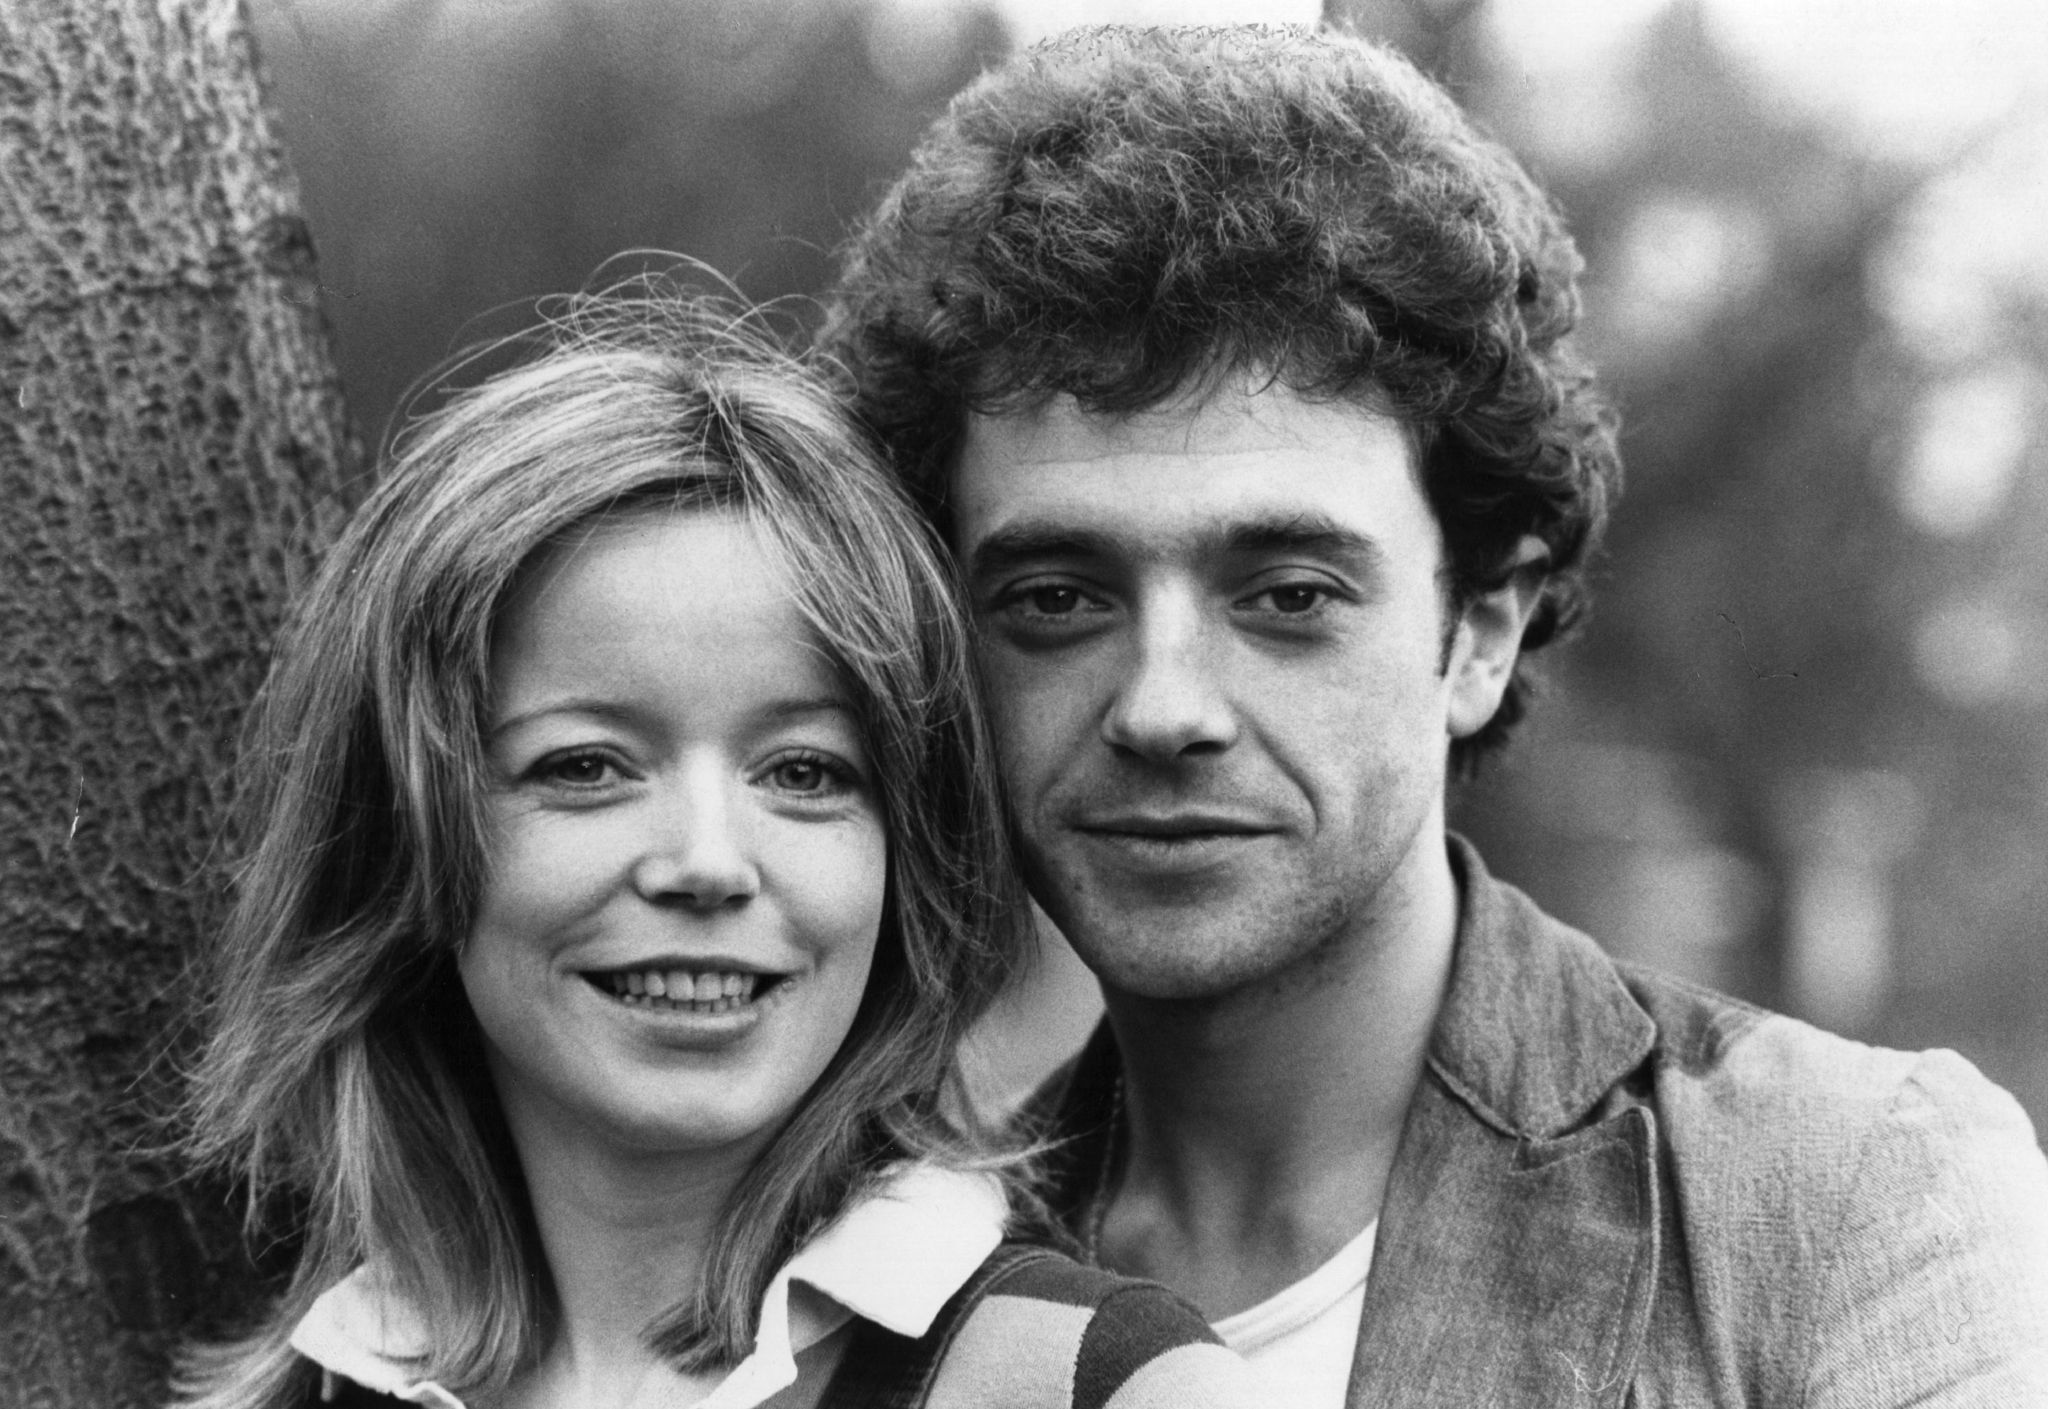 Michael Kitchen and Angharad Rees